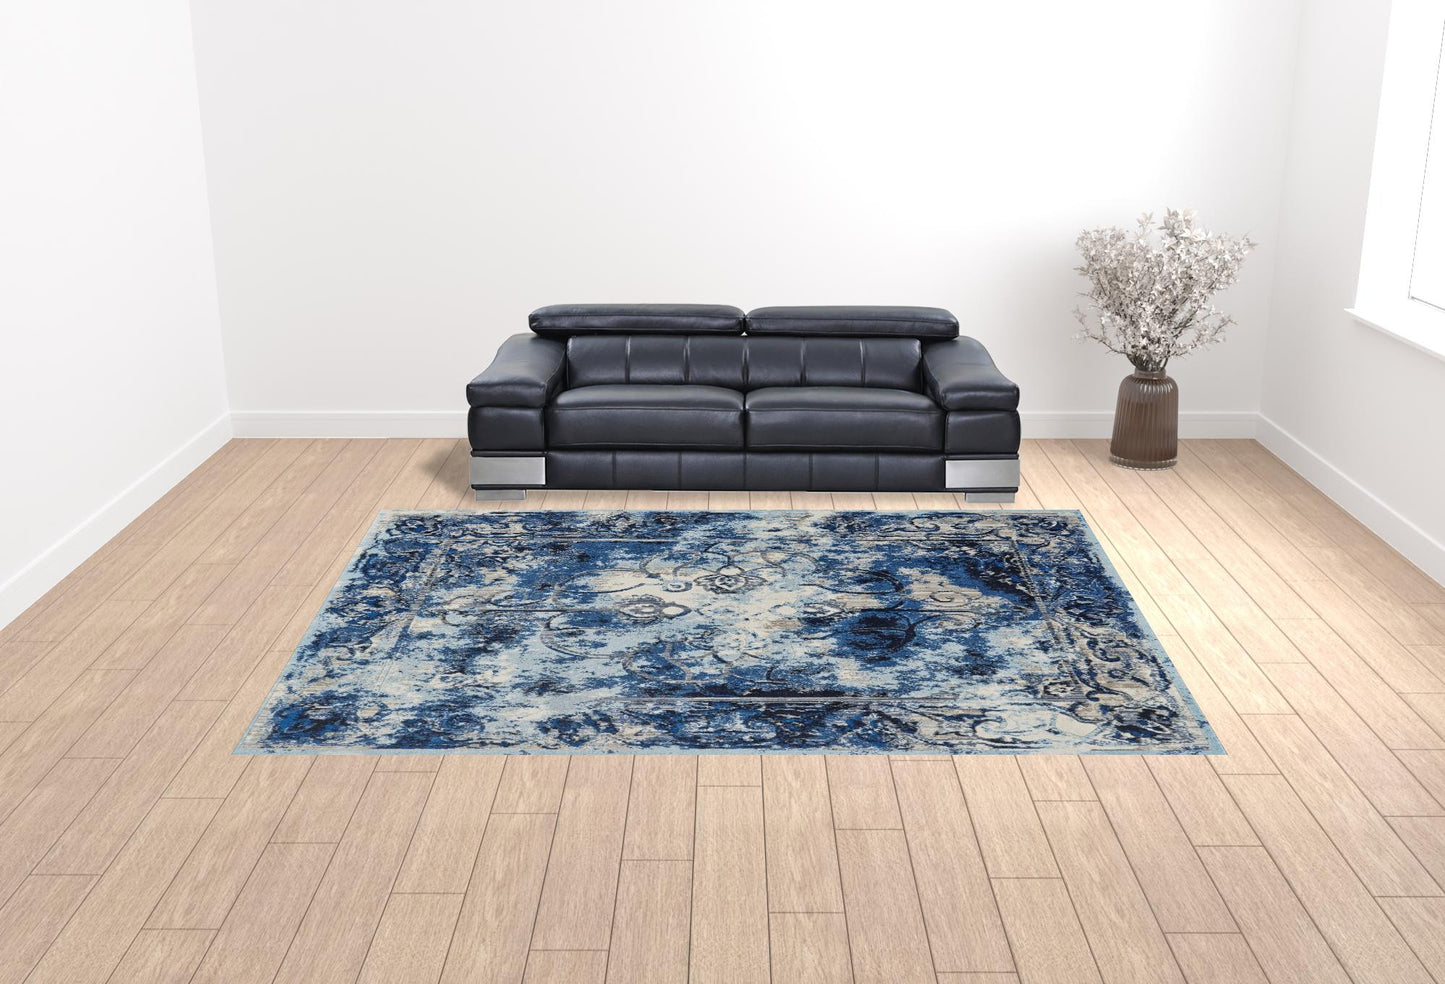 '9' Blue Ivory And Gray Round Floral Distressed Stain Resistant Area Rug